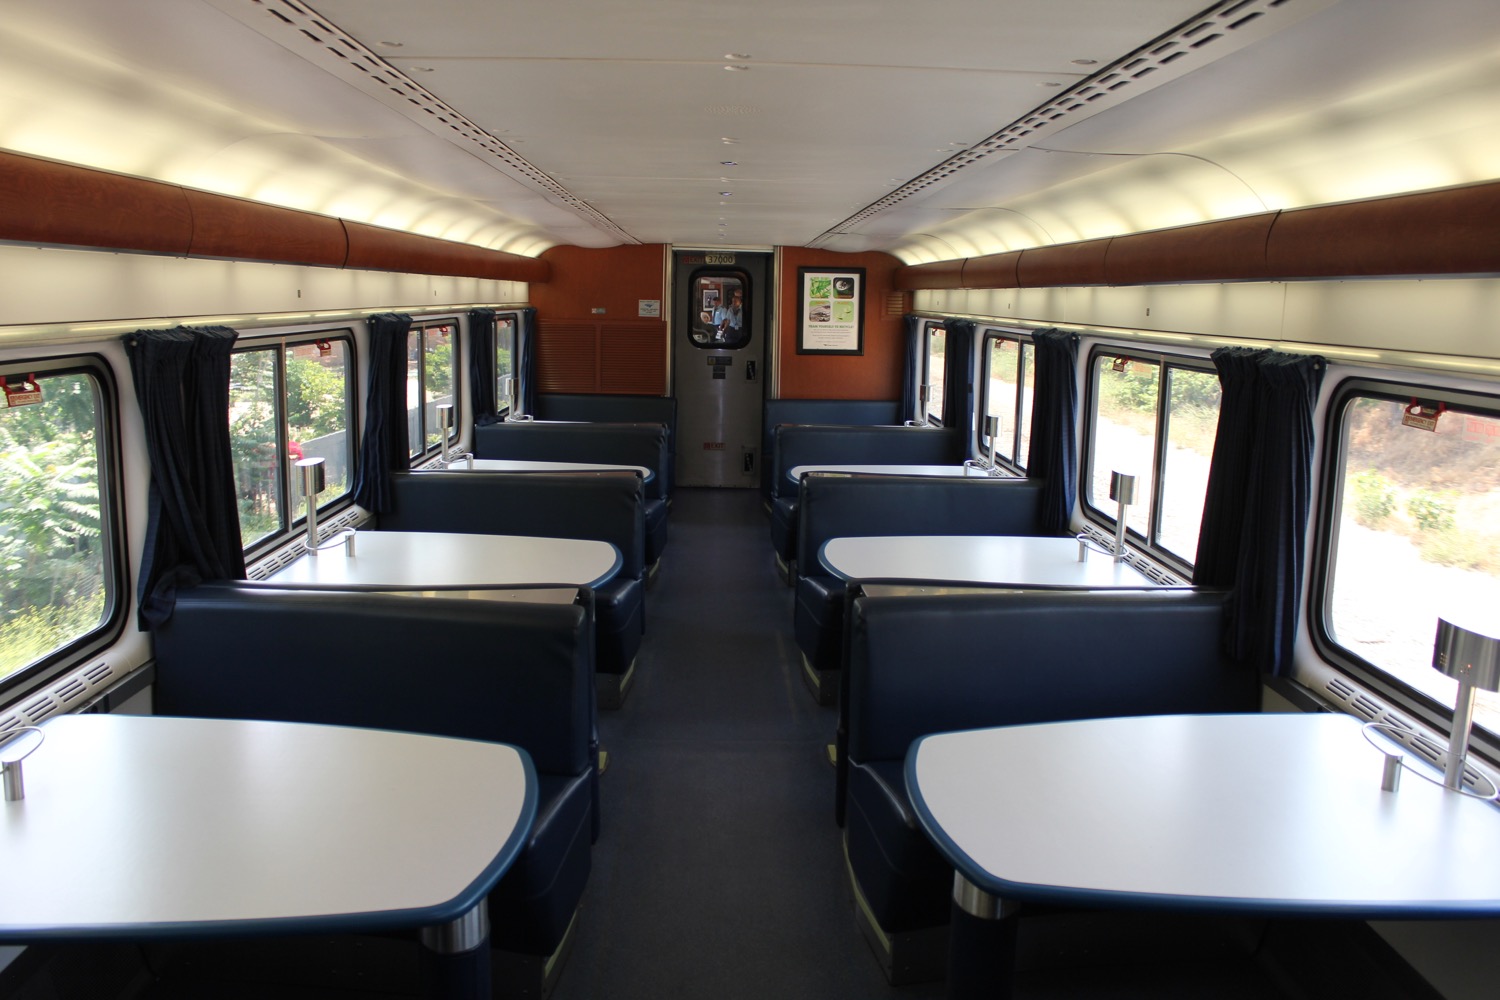 inside a train with tables and seats